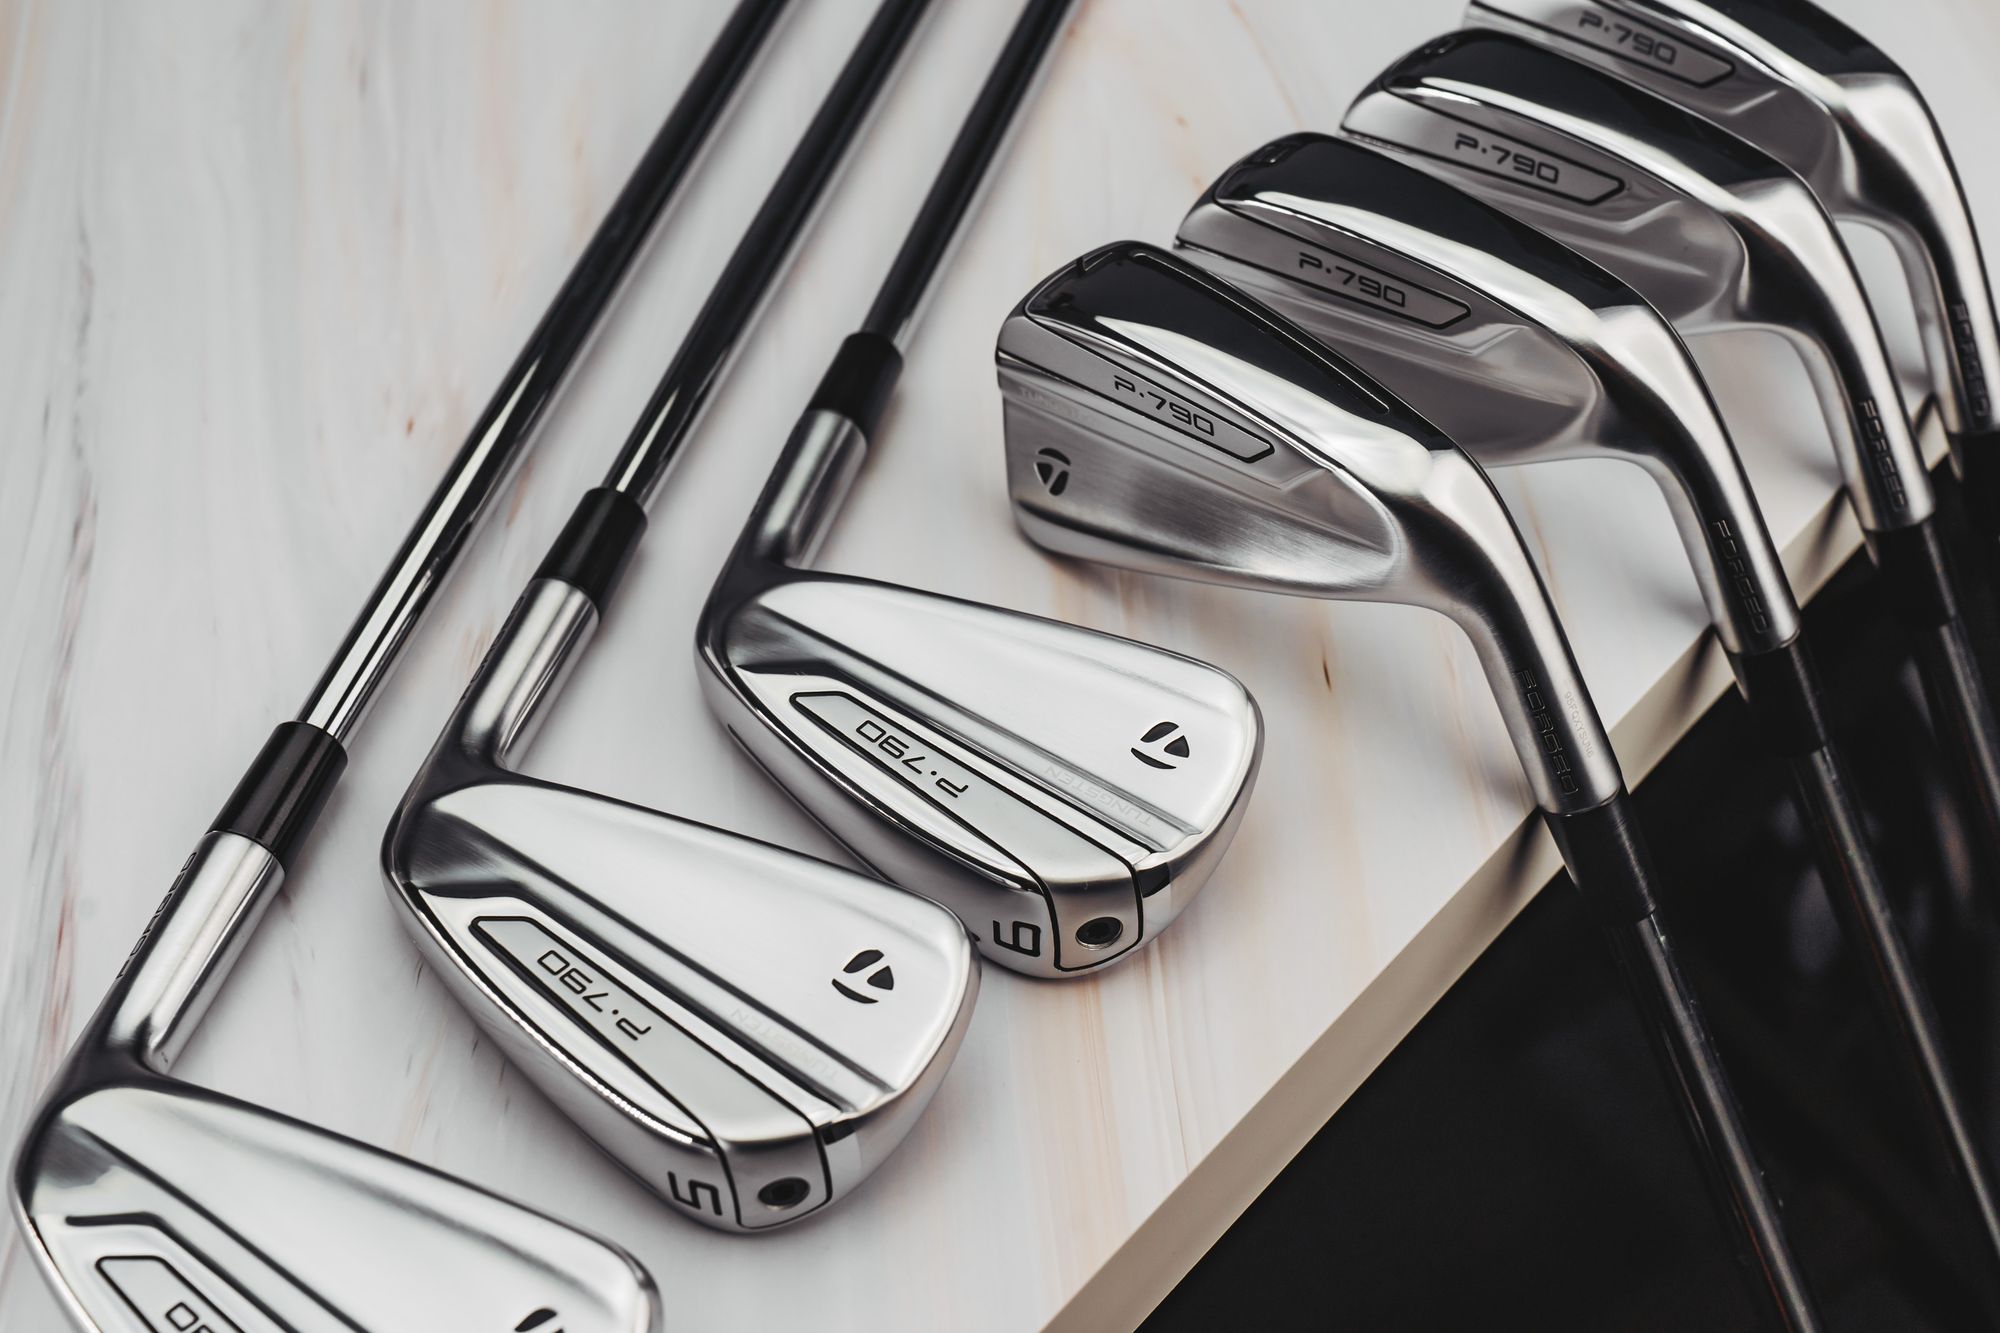 The All NEW TaylorMade P790 Irons